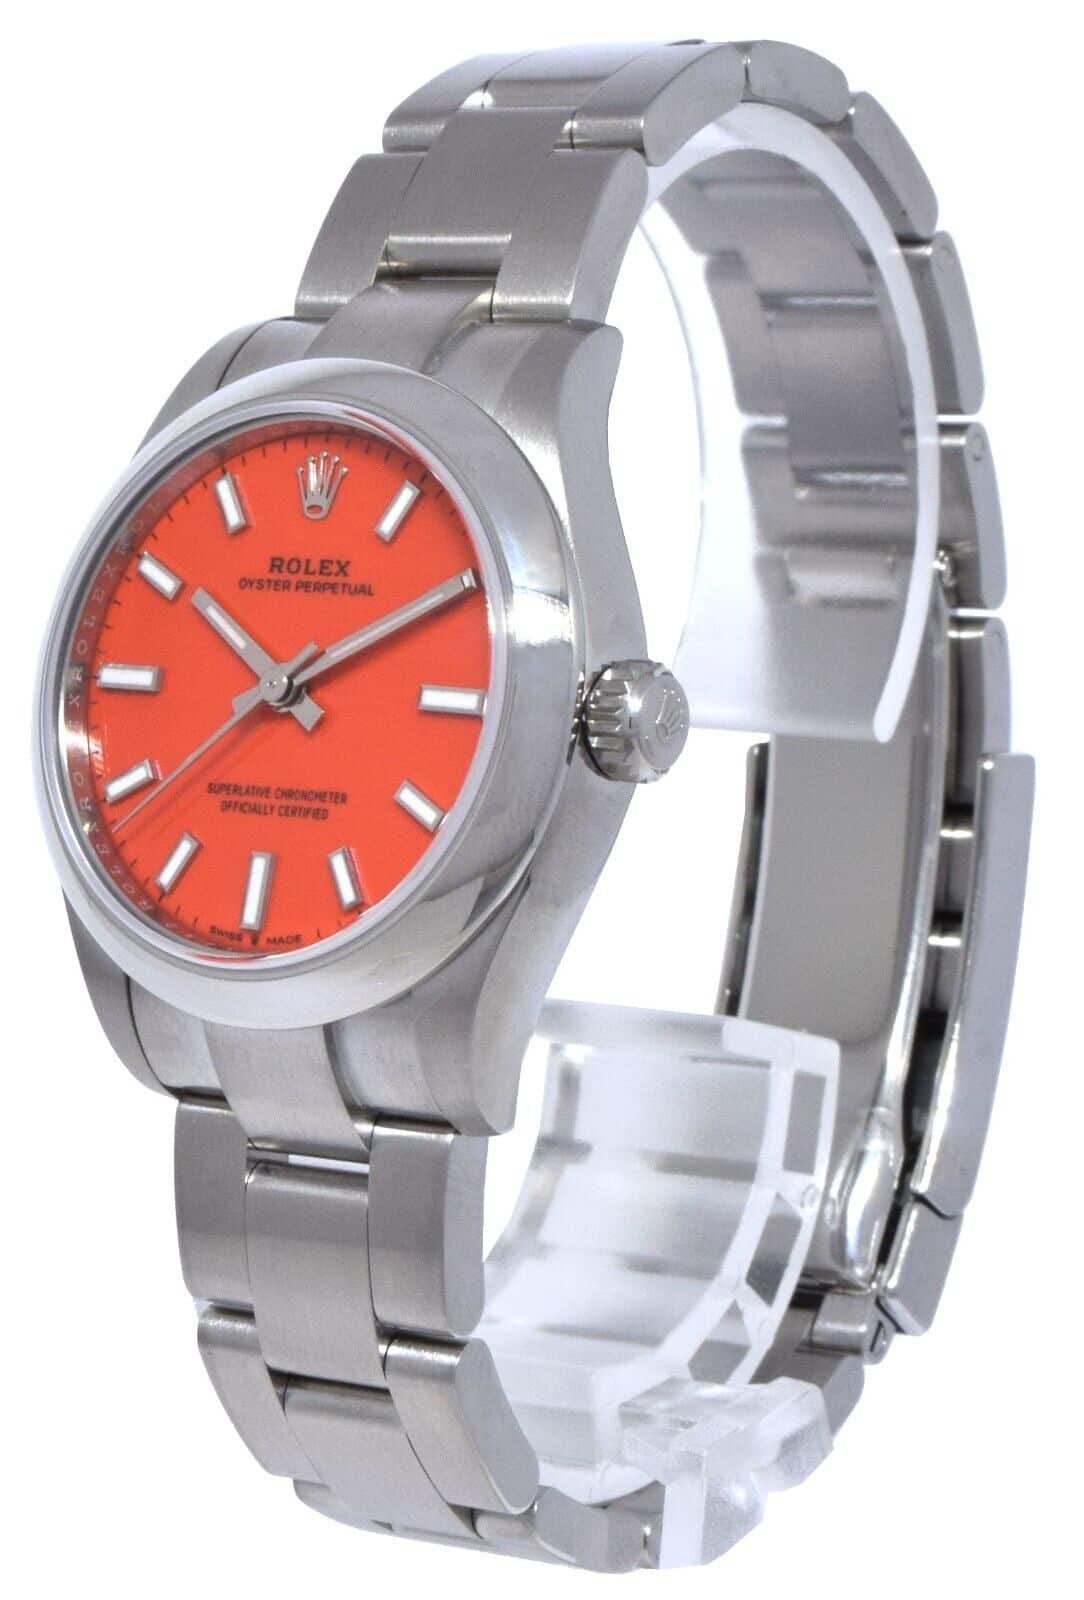 NOS Rolex Oyster Perpetual 31 Steel Coral Red Dial Mens Watch B/P '21 277200